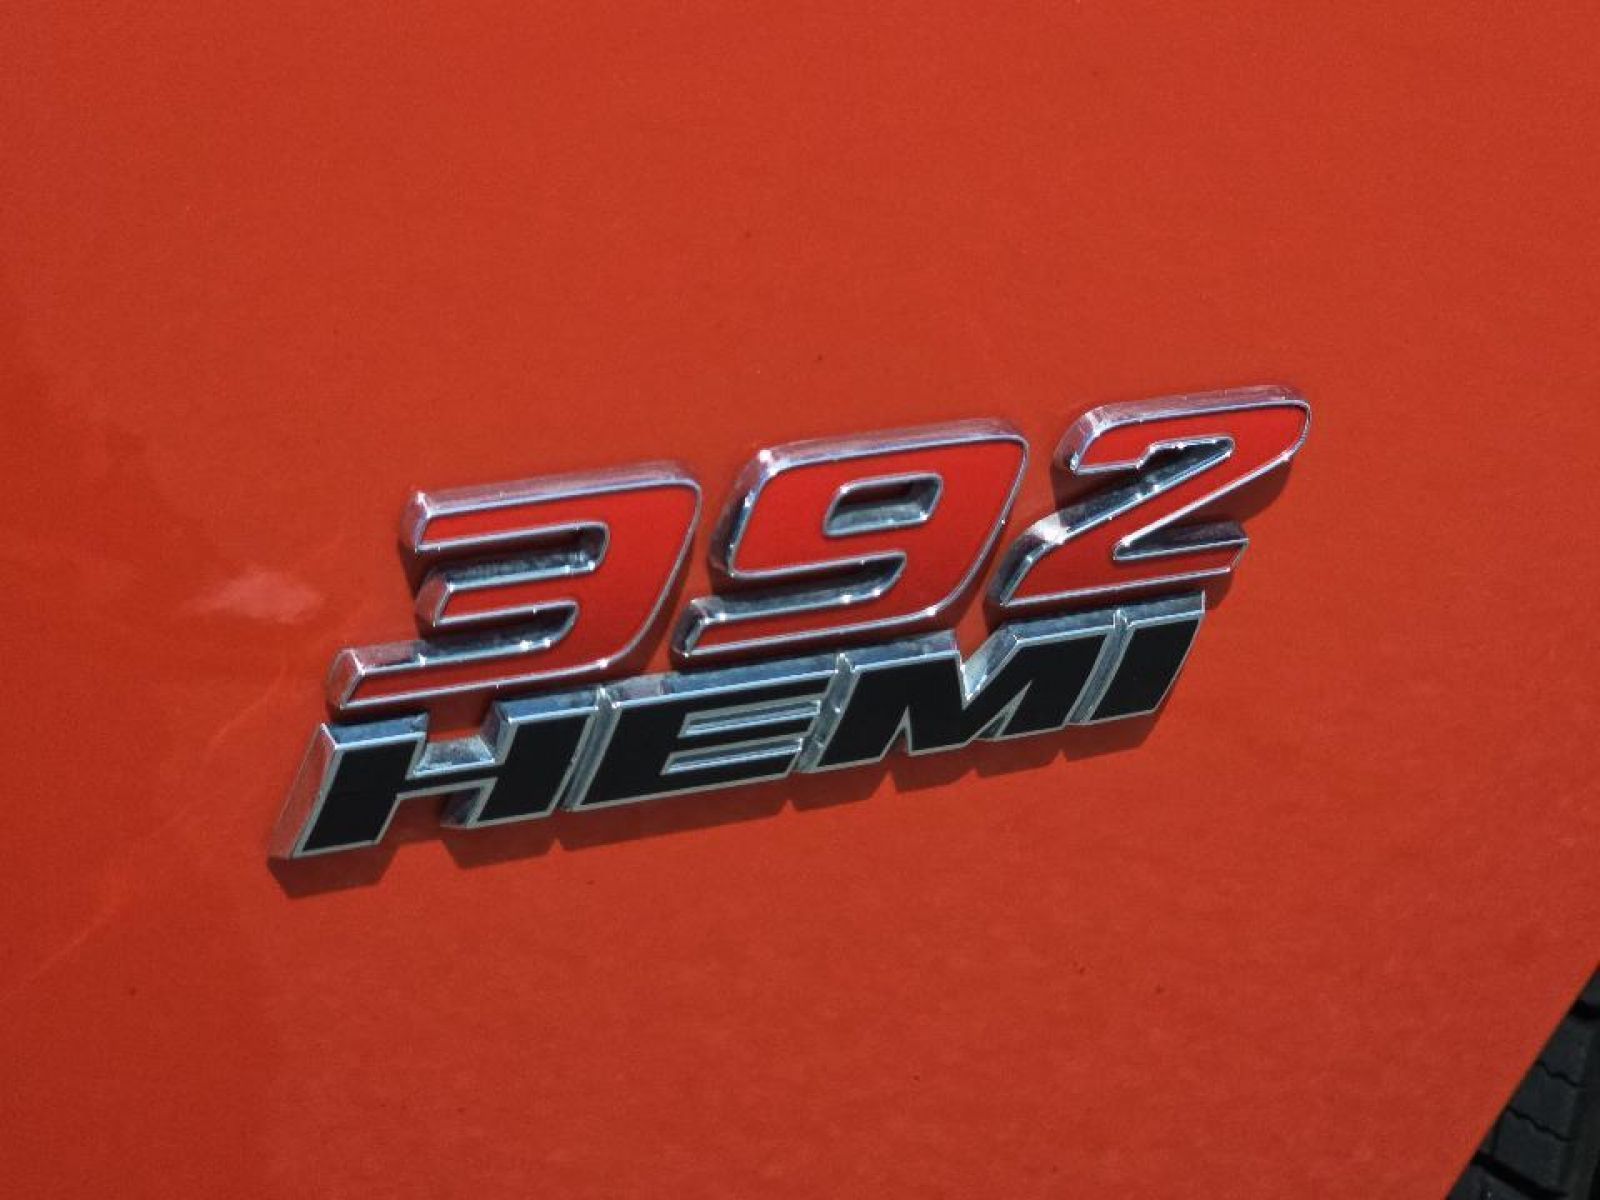 Used, 2020 Dodge Charger R/T Scat Pack, Orange, G0809A-6